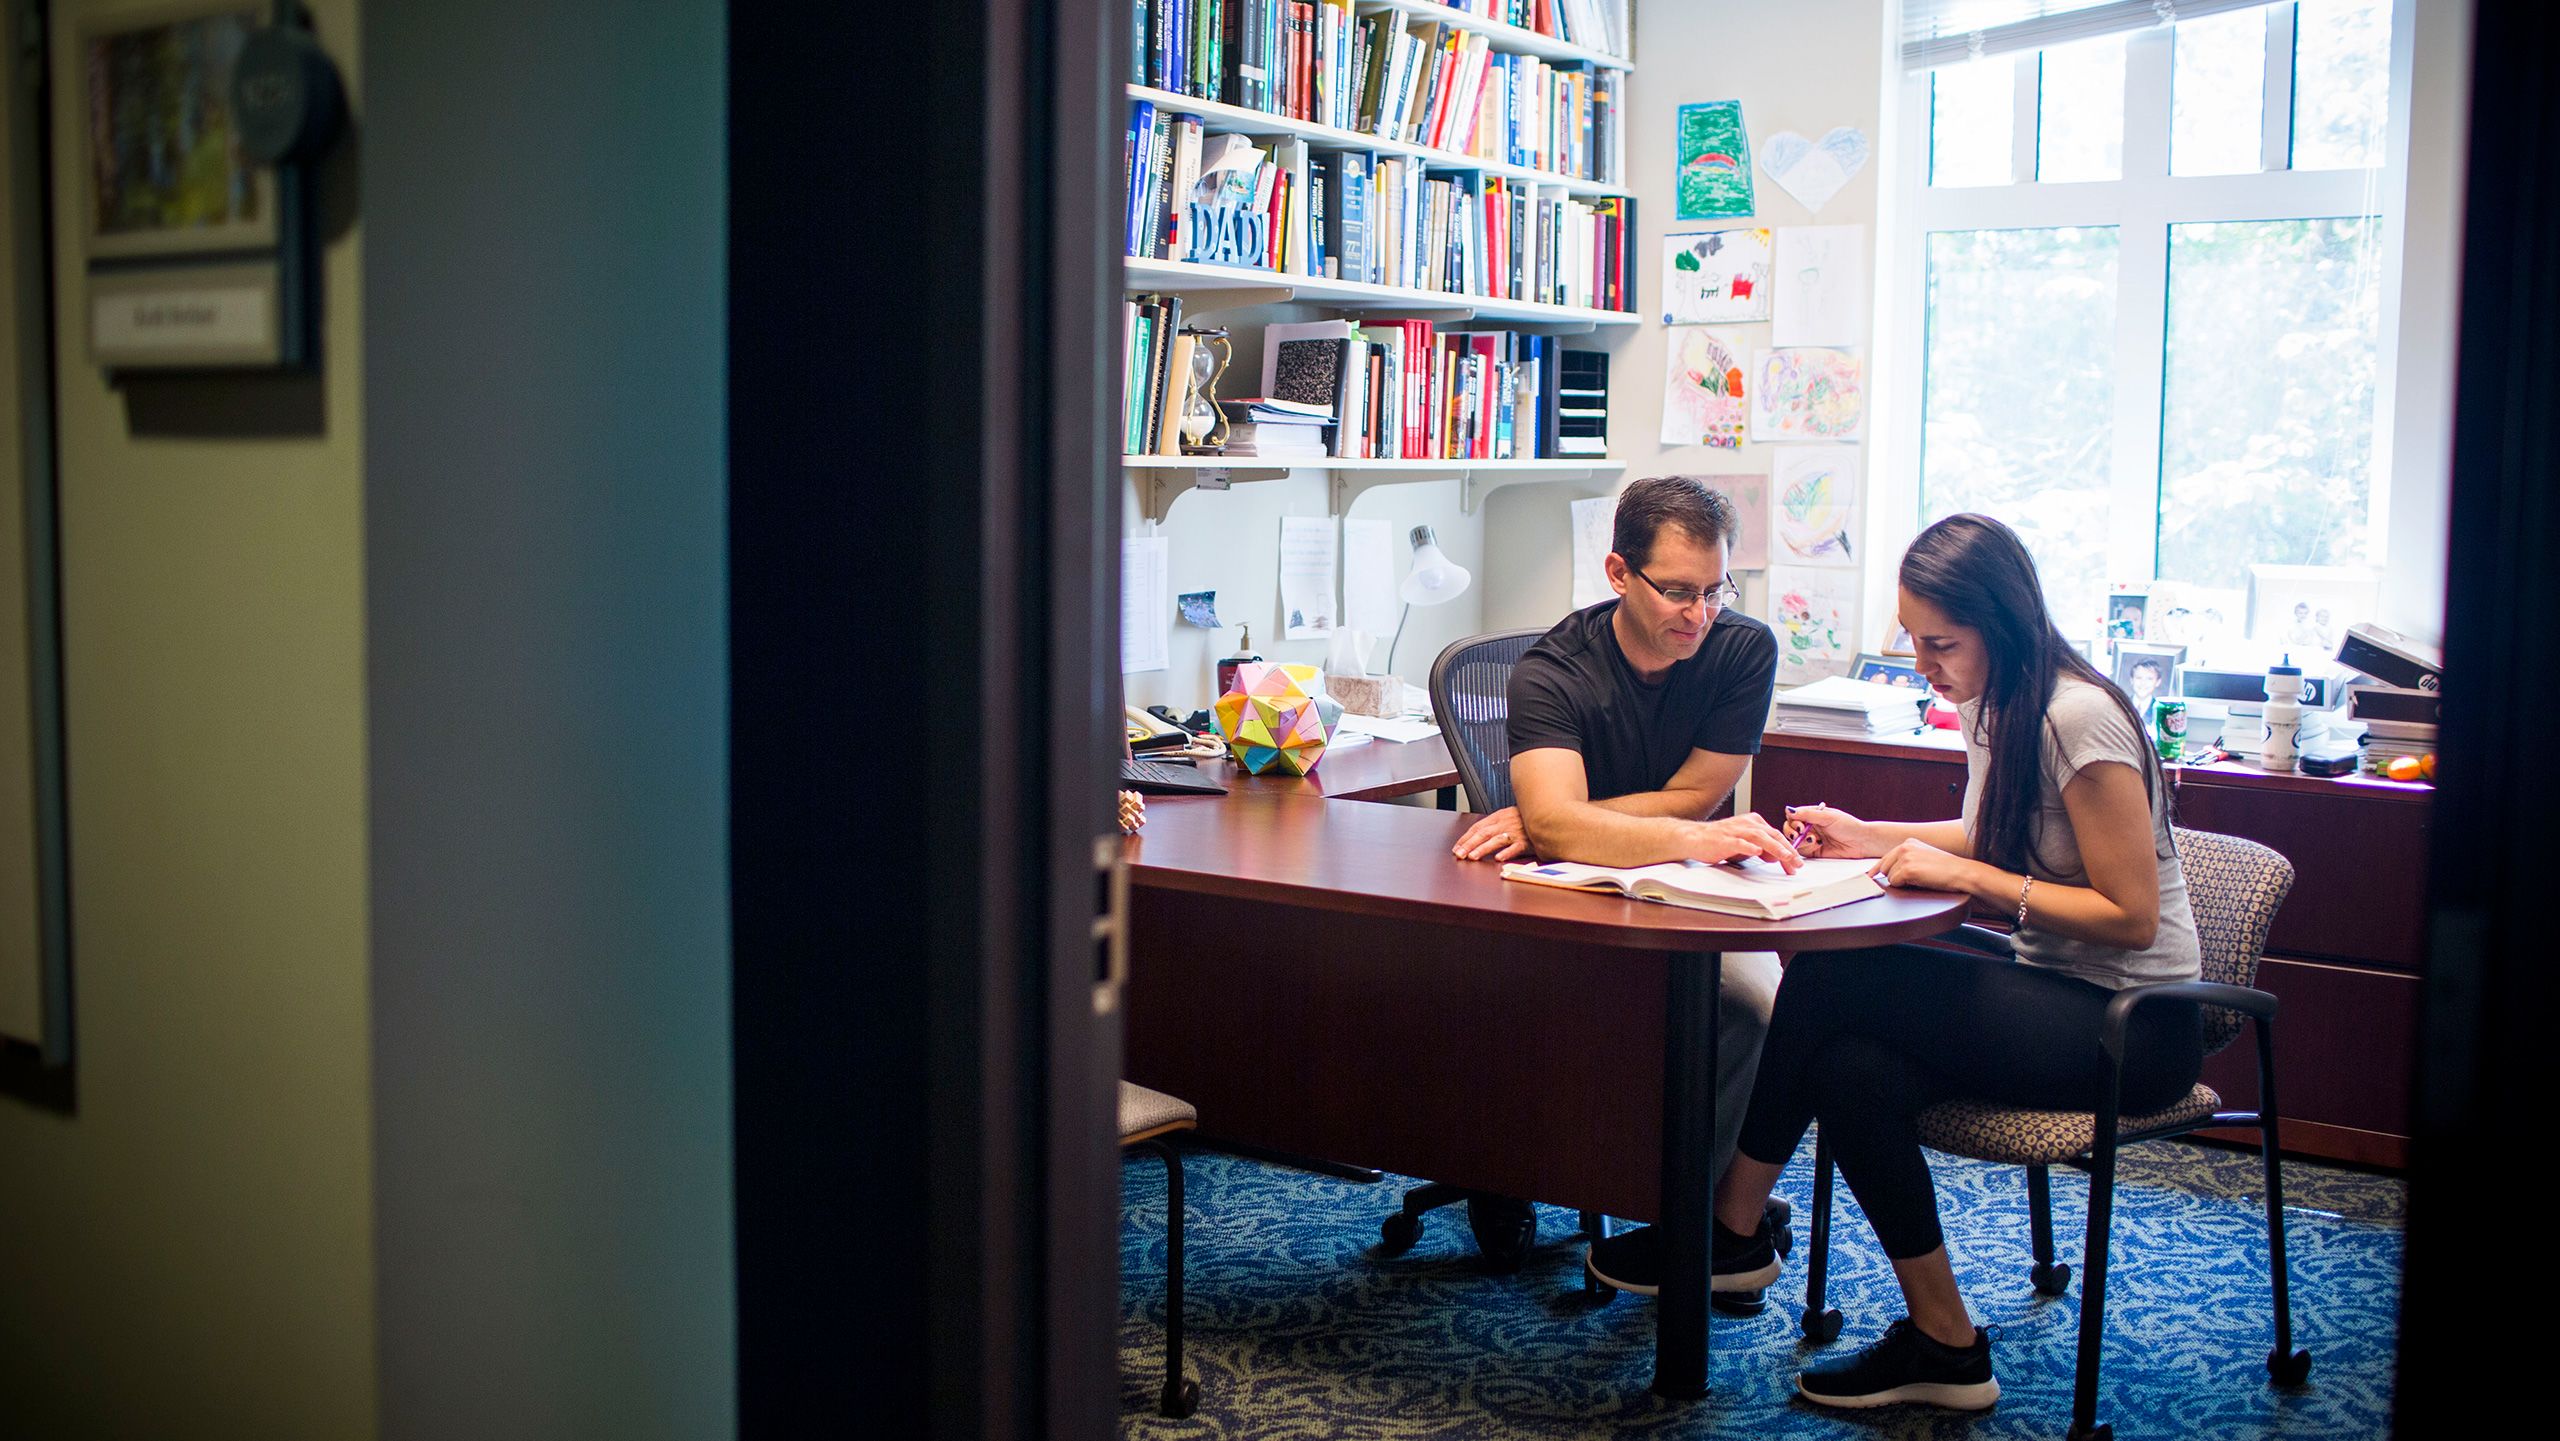 Physics Professor Dr. Keith Berland with Emory College student Stephanie Wahab in his office.